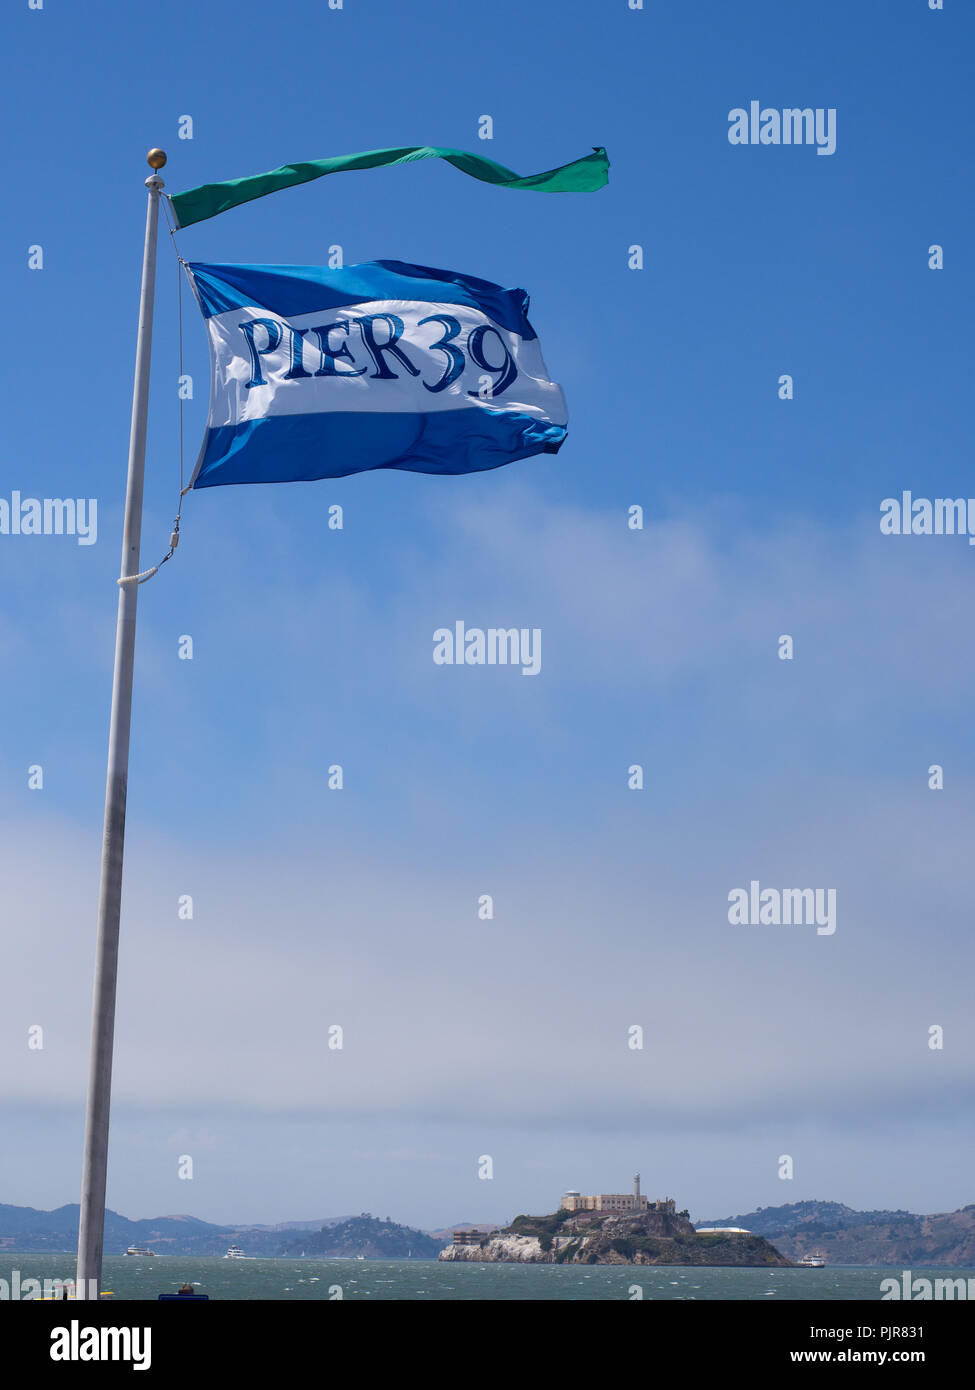 Pier 39 Flag Blowing iN The Wind Stock Photo